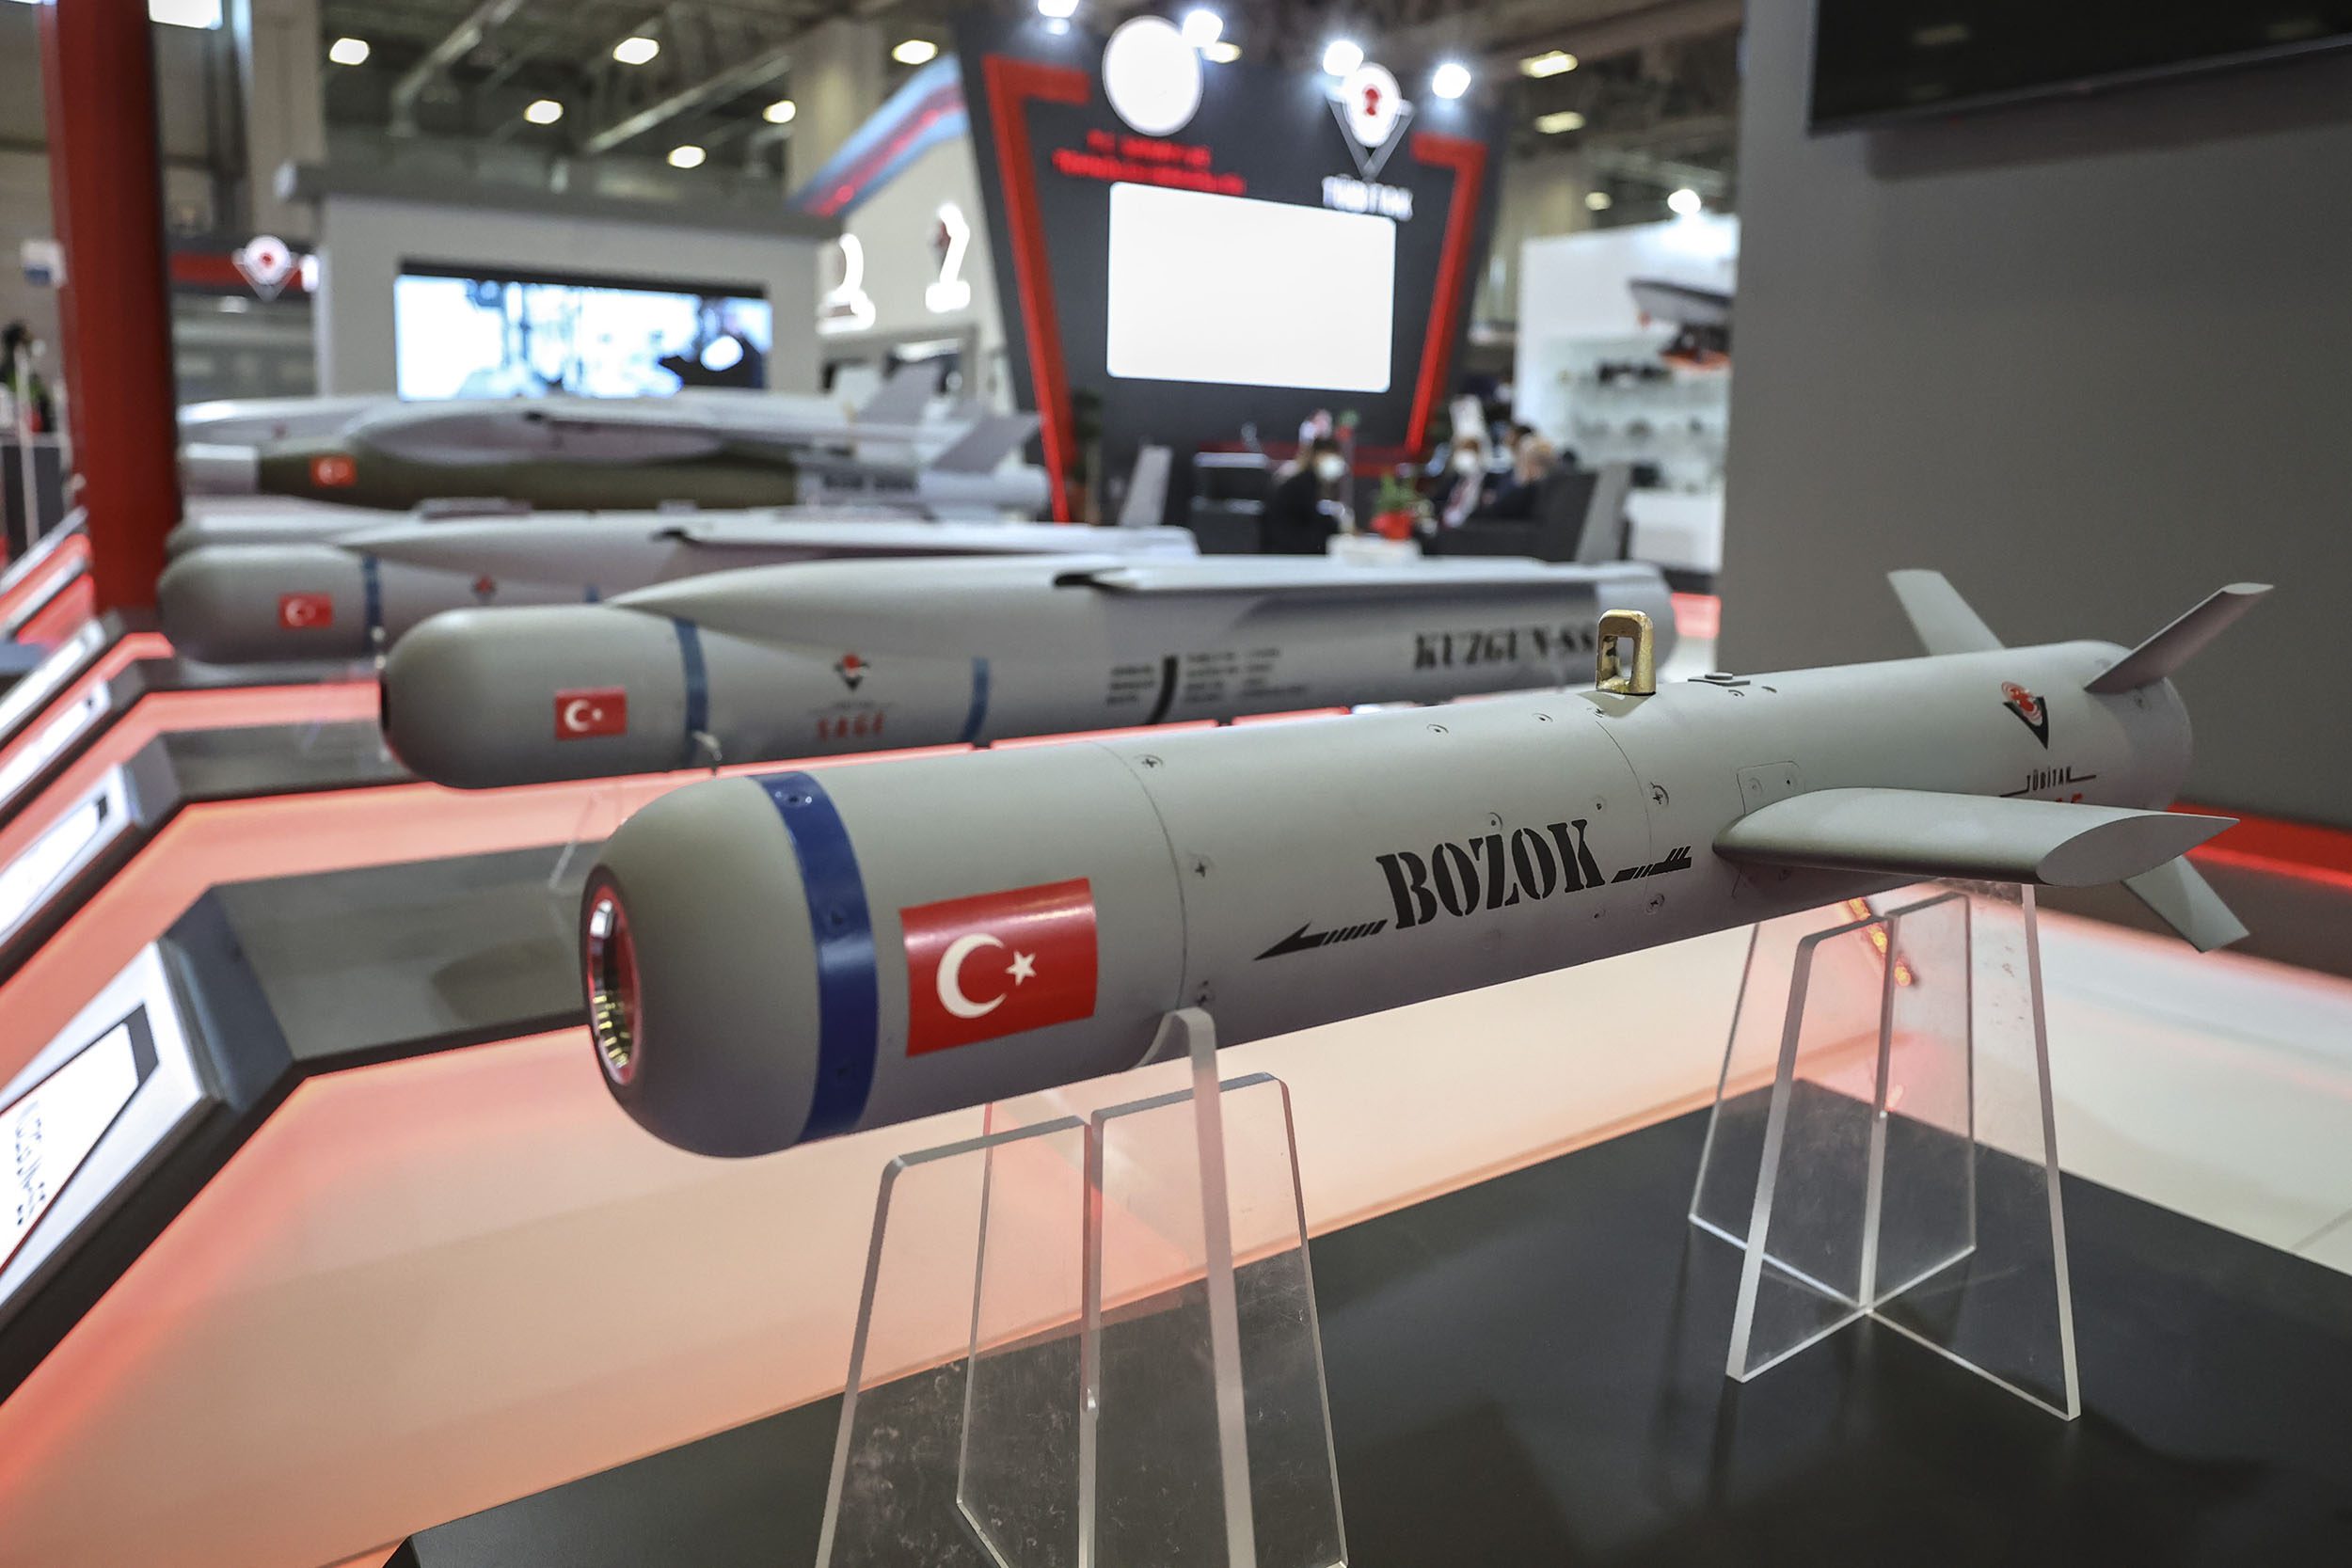 Turkey to be global player in defense industries: Top official